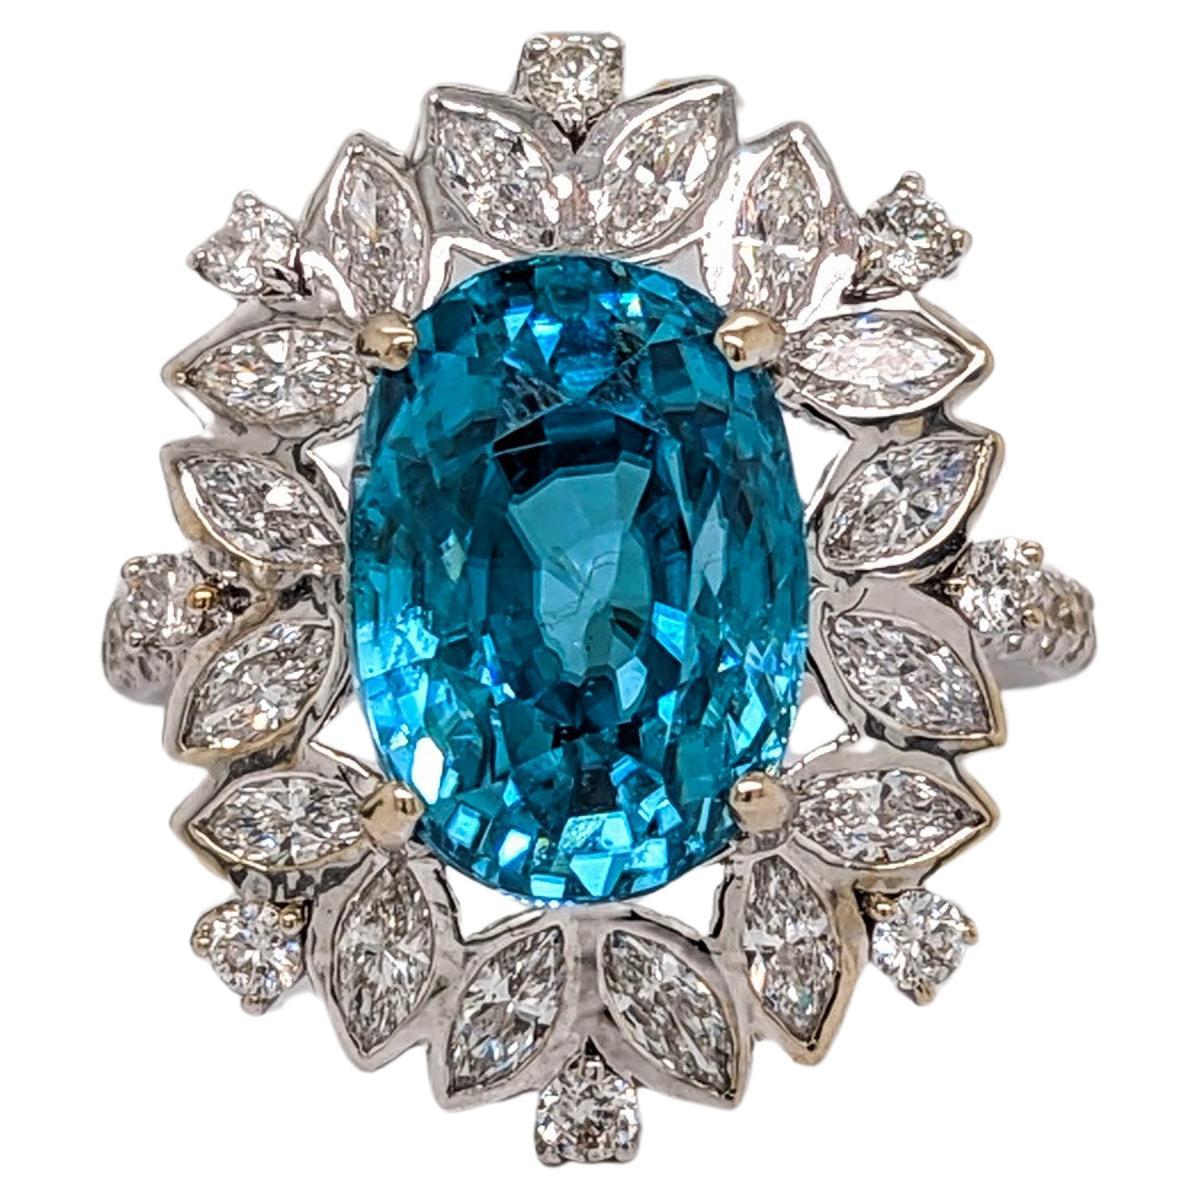 9.5ct Blue Zircon Pavé Cocktail Ring in Solid 14K White Gold Oval